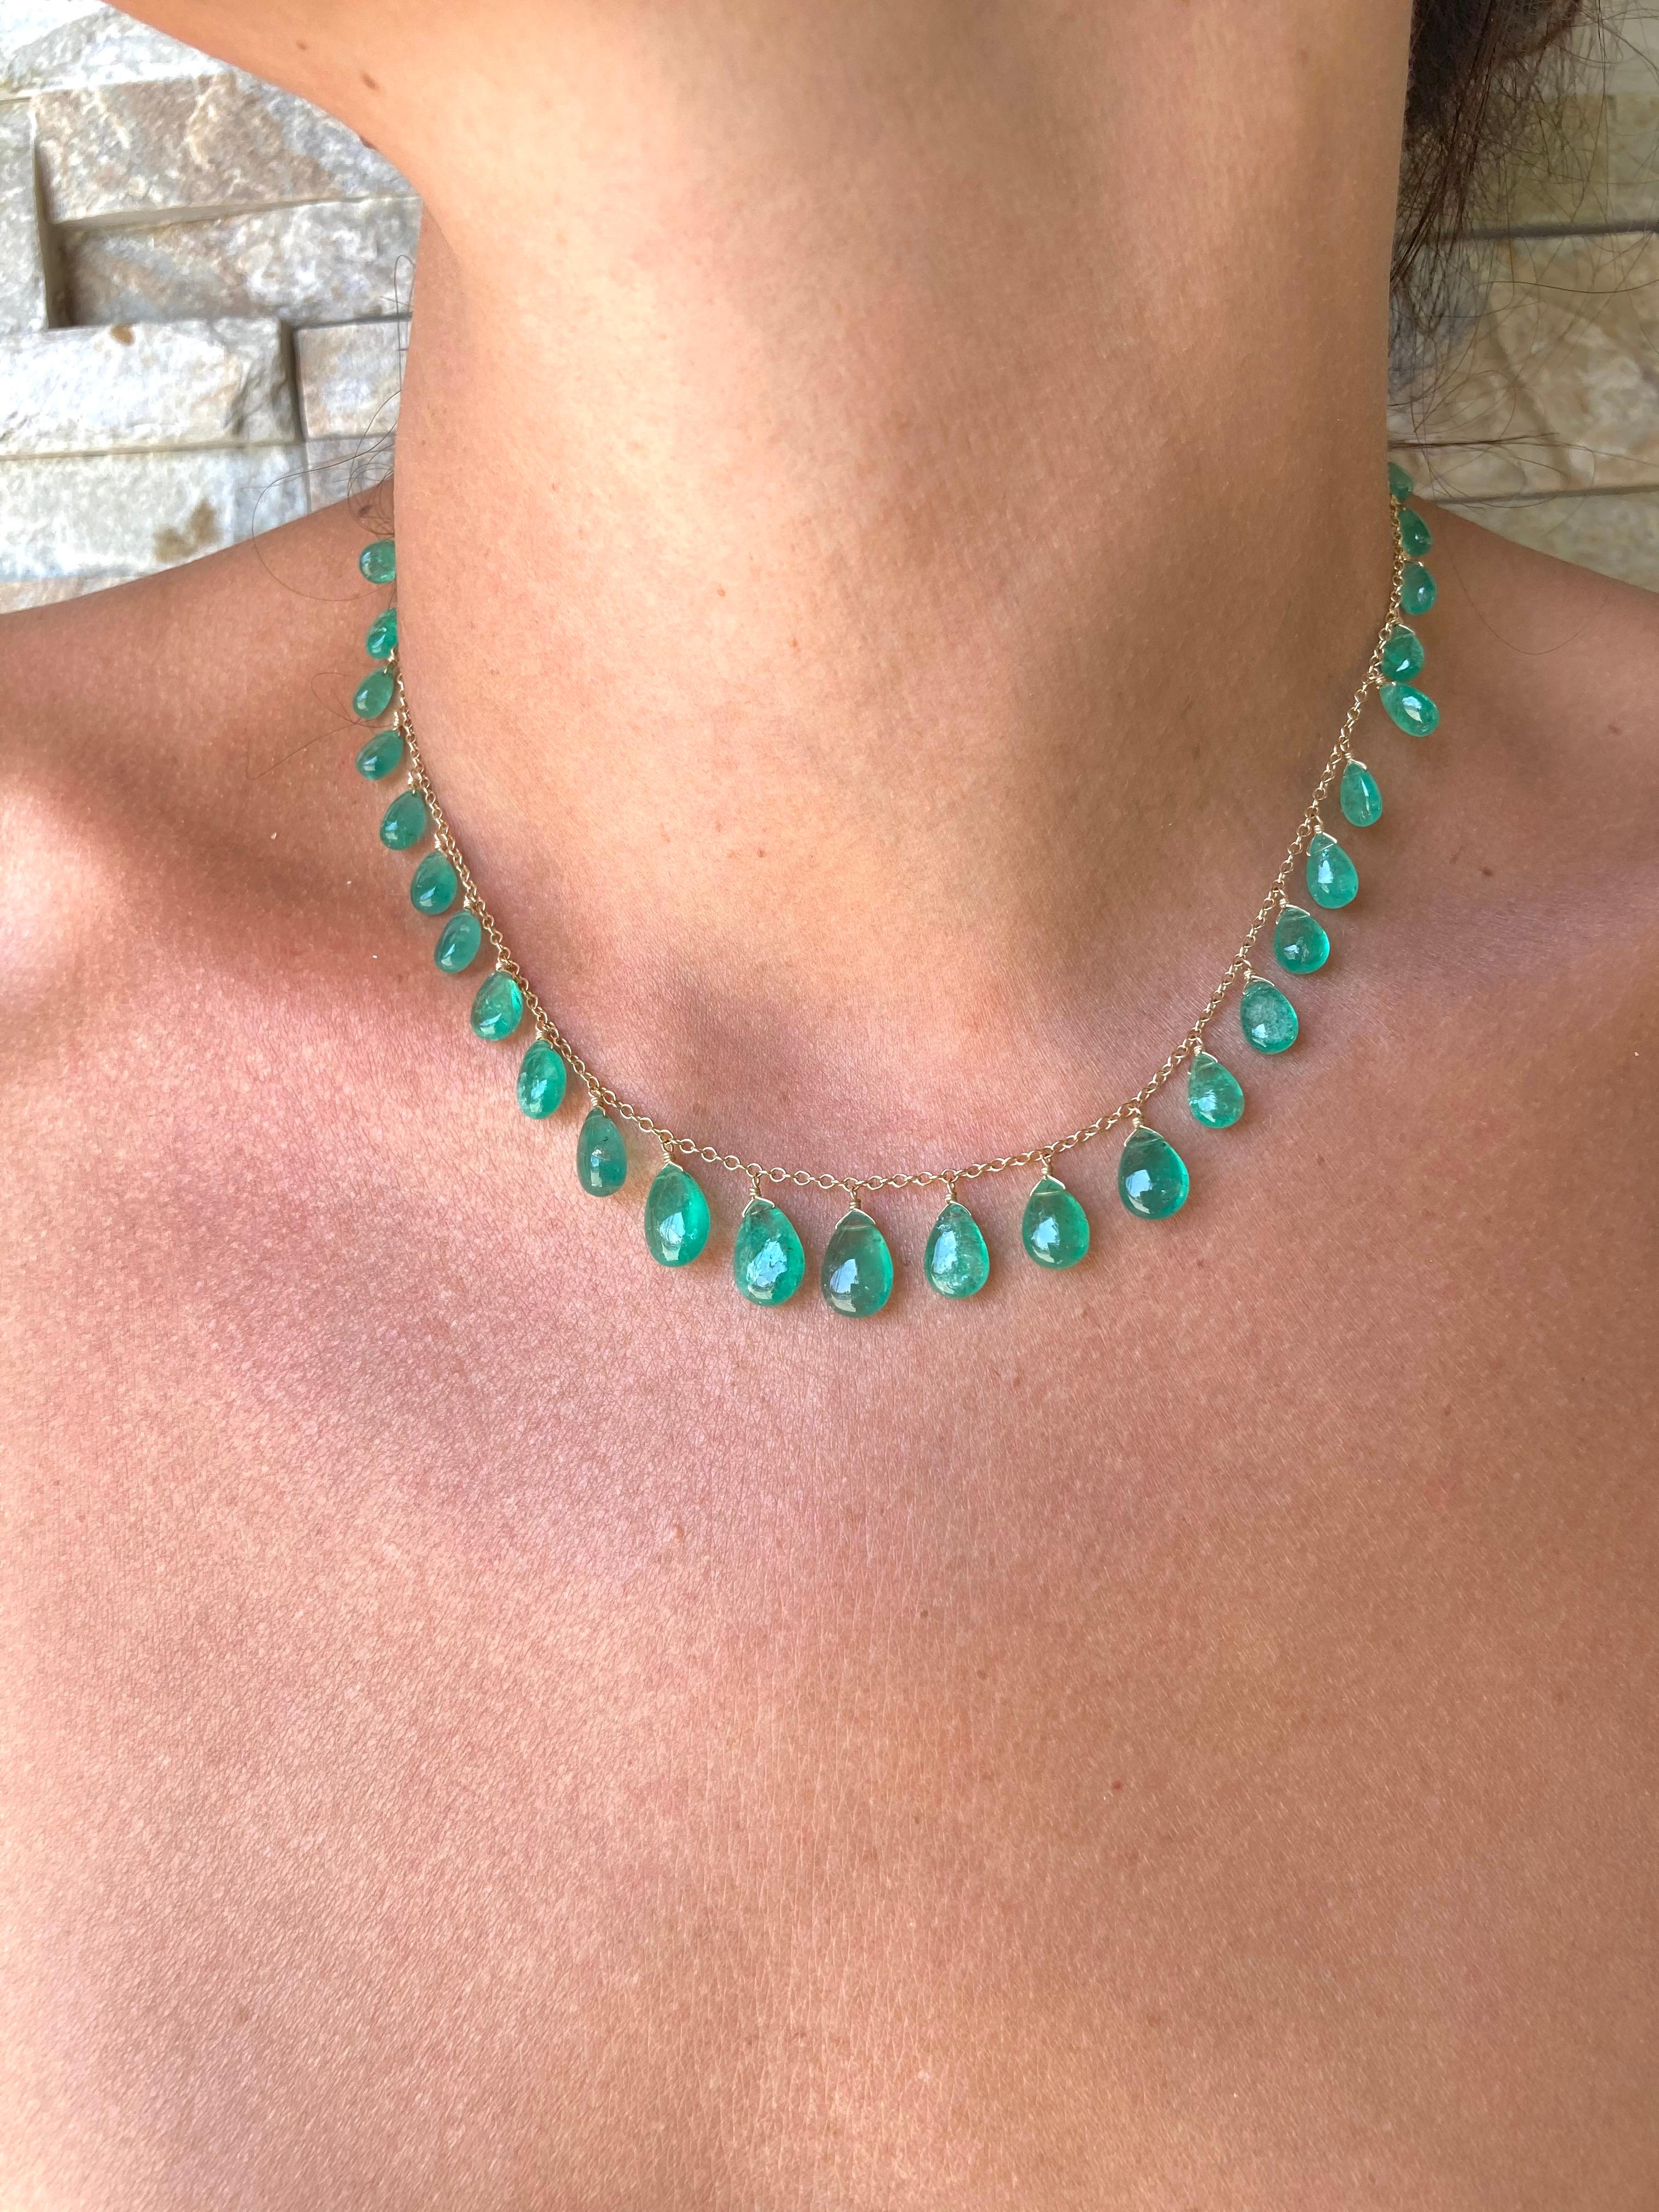 33 pear shape cabochon Colombian Emerald were carefully selected for their size and color to make this delicate necklace. Expected of Emeralds, they are slightly included,  but have that vibrant green color I look for when buying emeralds. Emerald